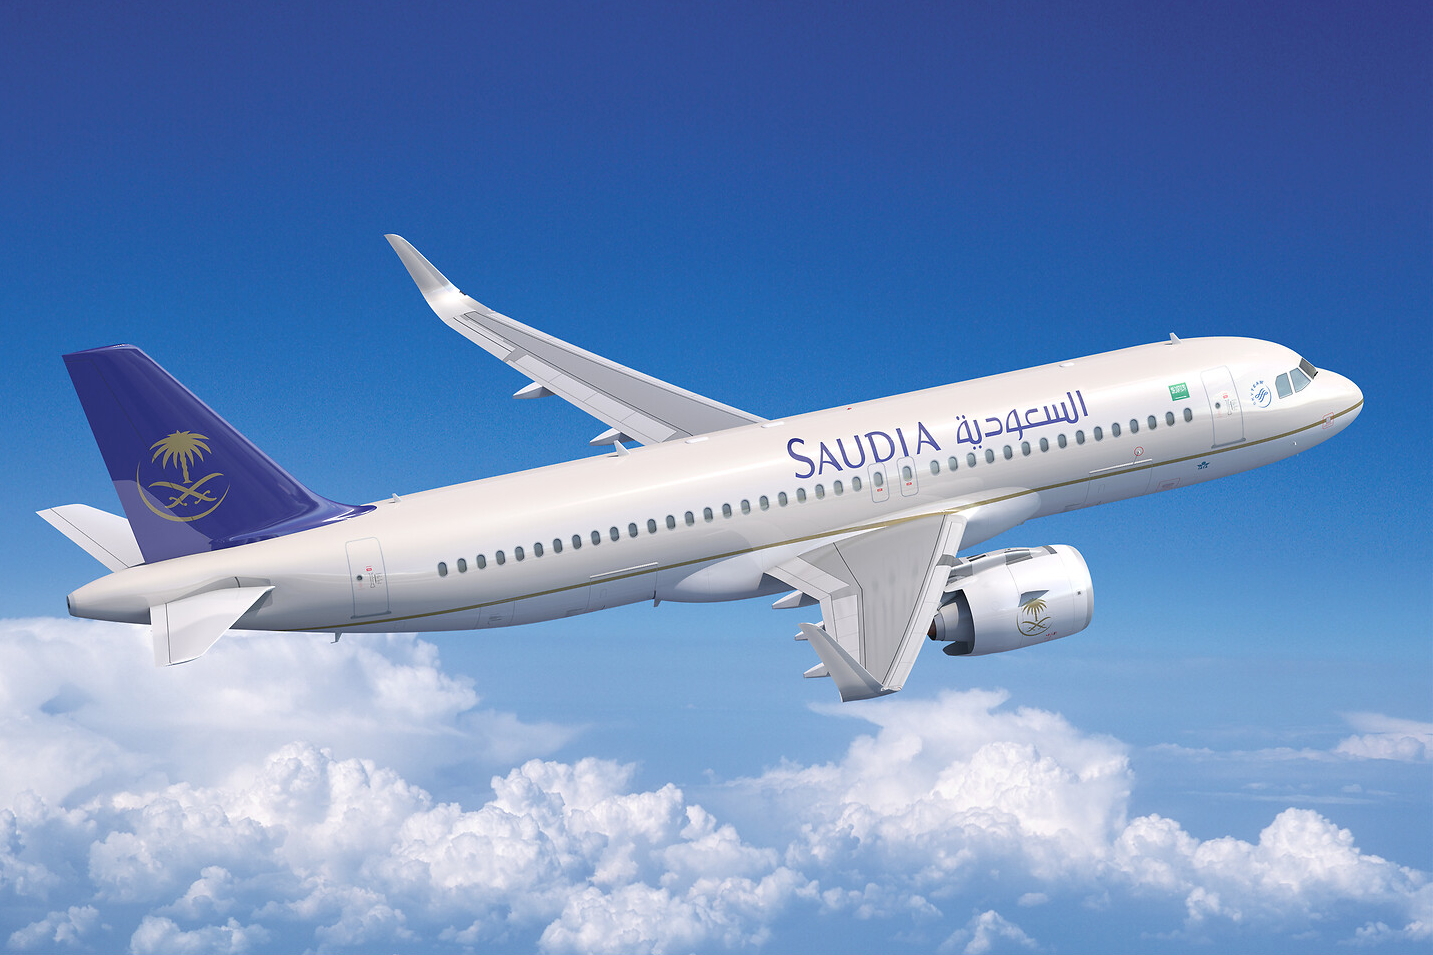 Saudia Airbus A320neo. Click to enlarge.